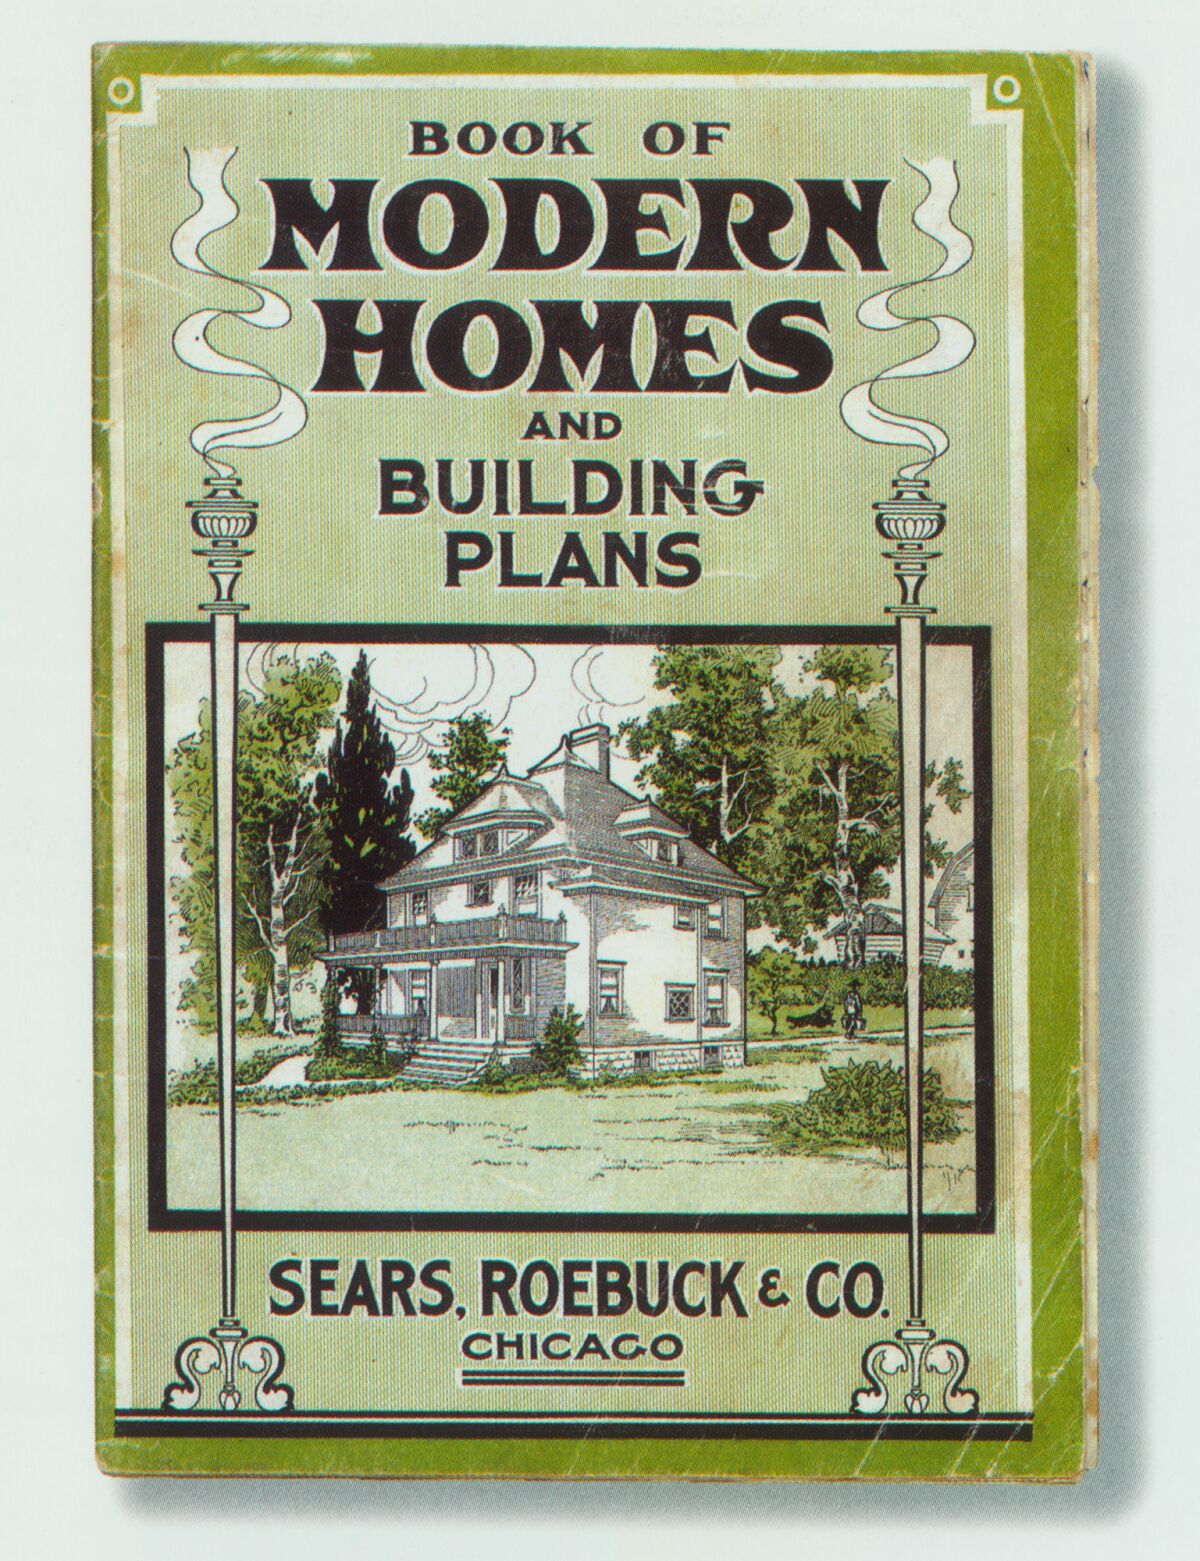 Sears, Roebuck & Co. catalogs featured a selection of models that buyers could customize to their own specifications.